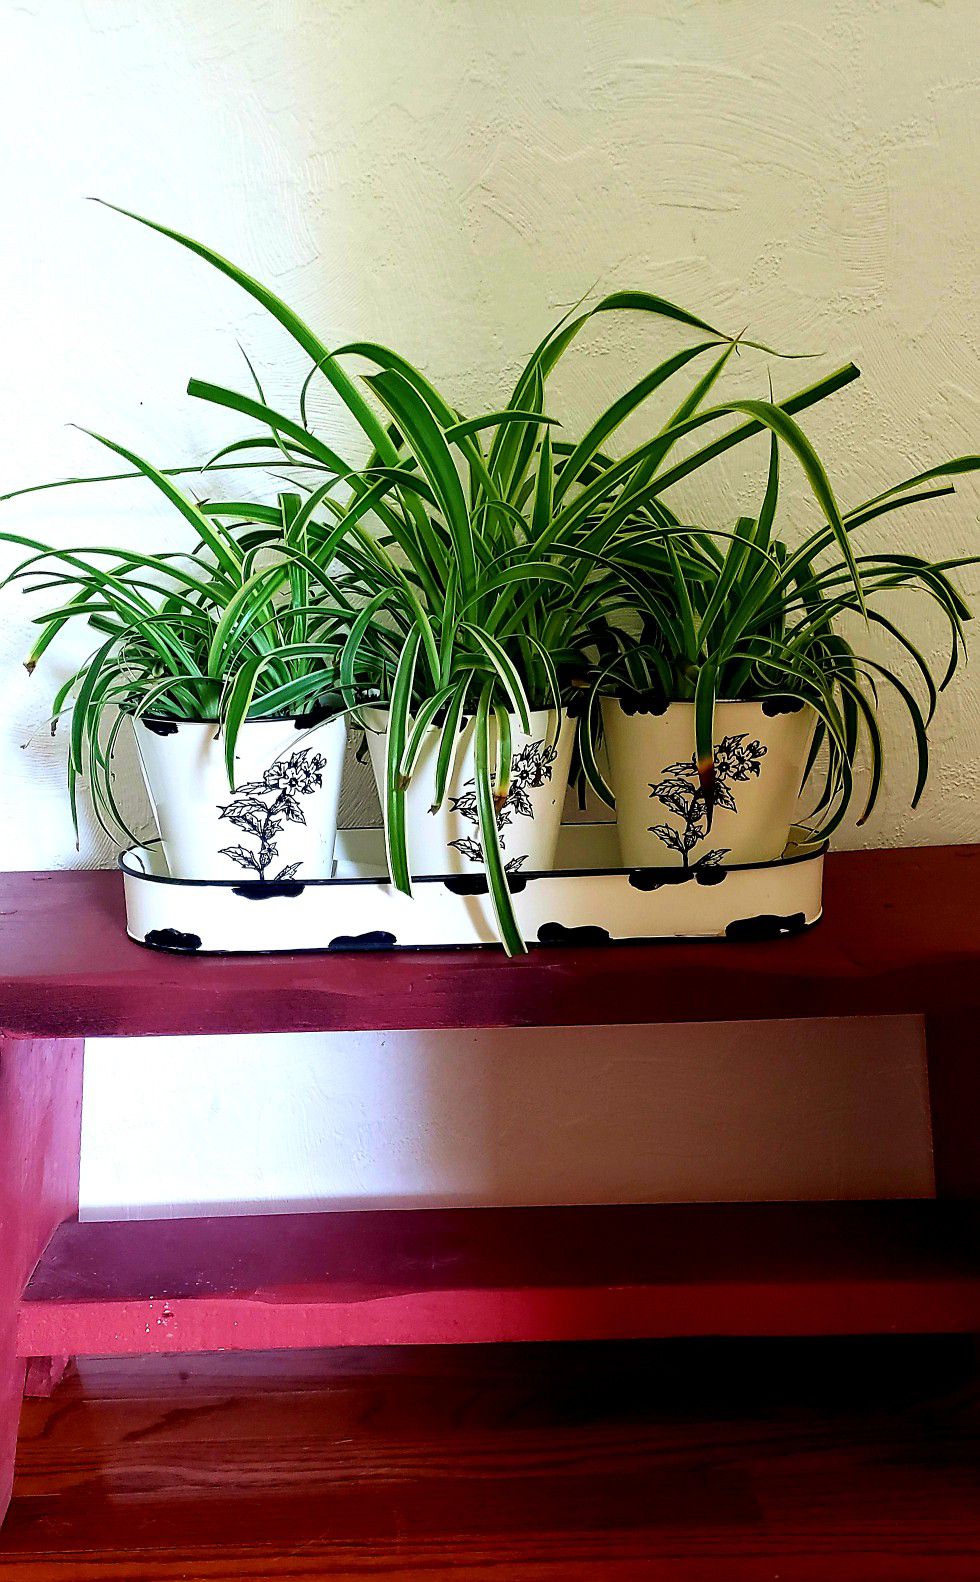 3 spider plants and tray